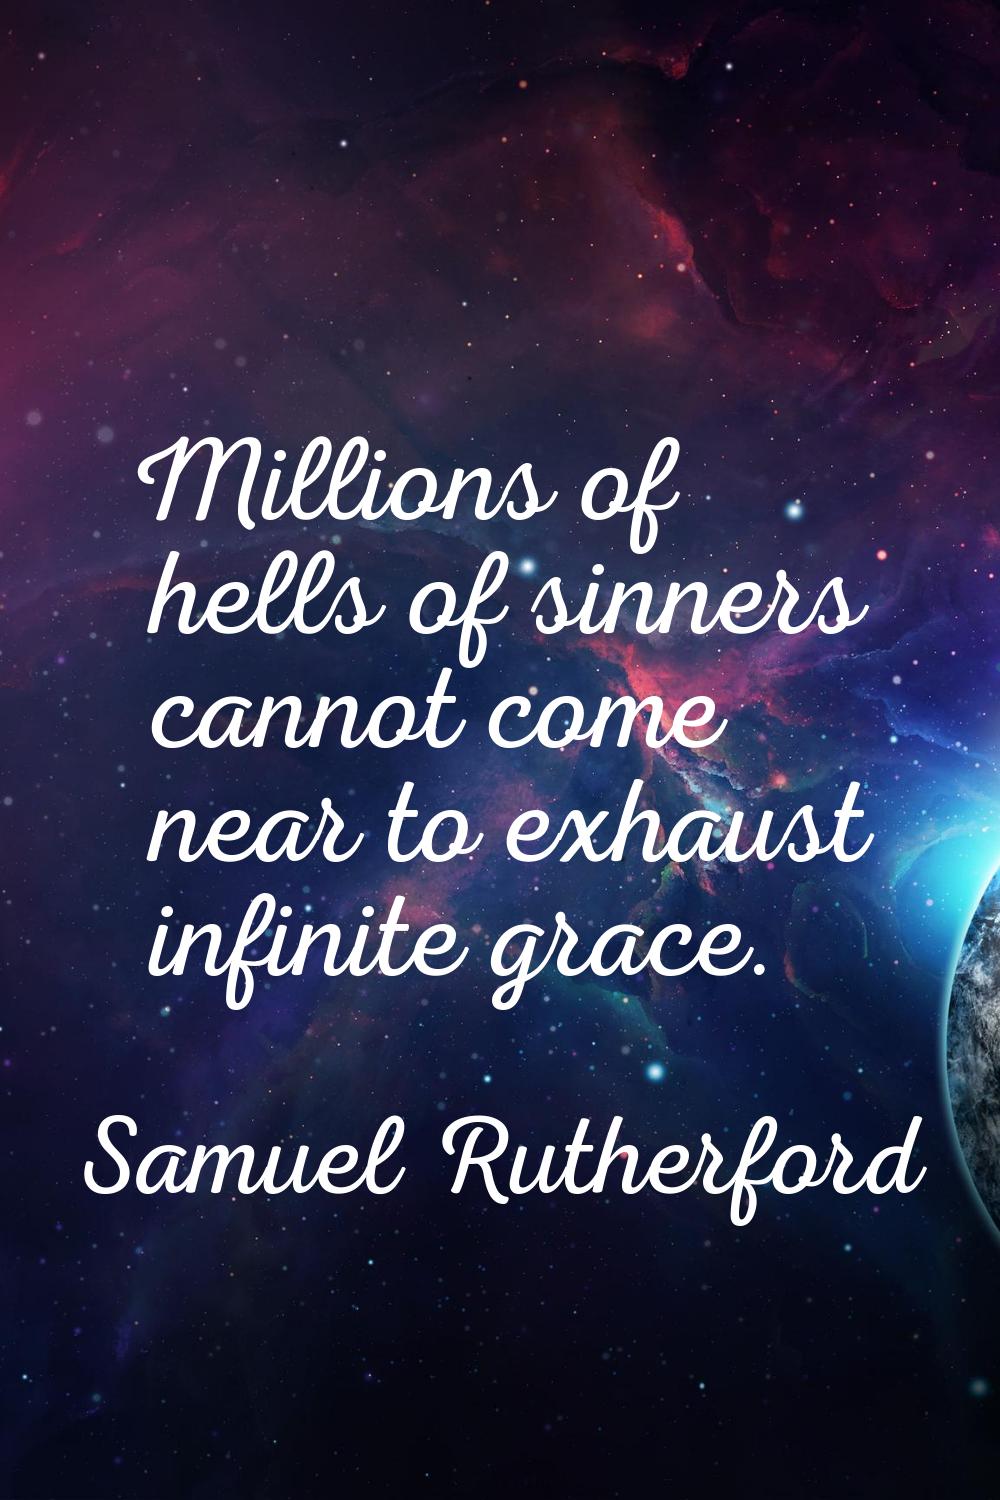 Millions of hells of sinners cannot come near to exhaust infinite grace.